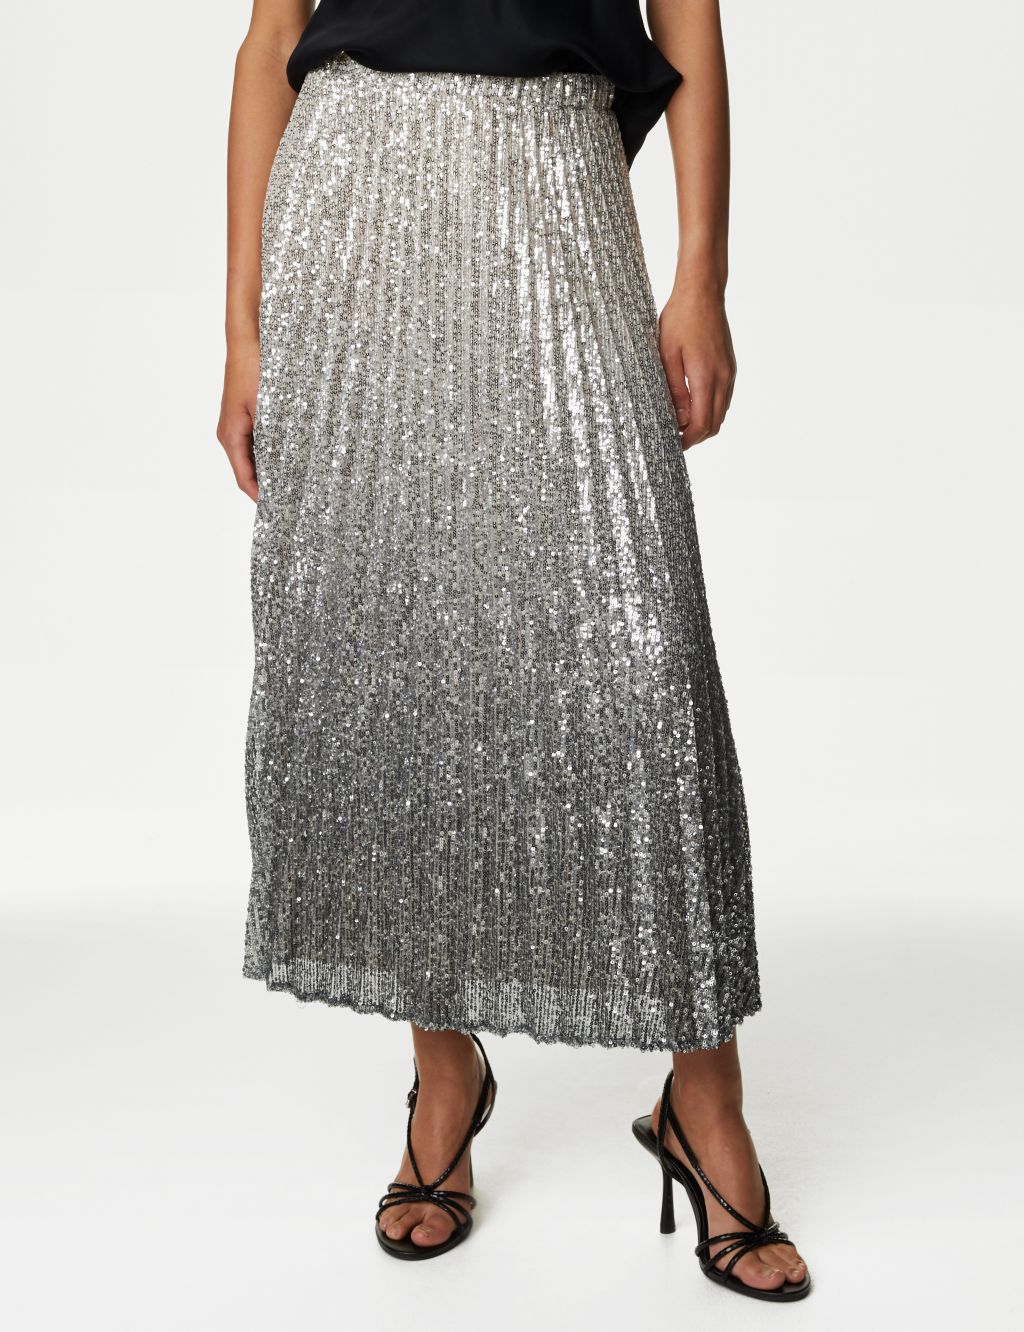 Sequin Ombre Pleated Midaxi Skirt image 4